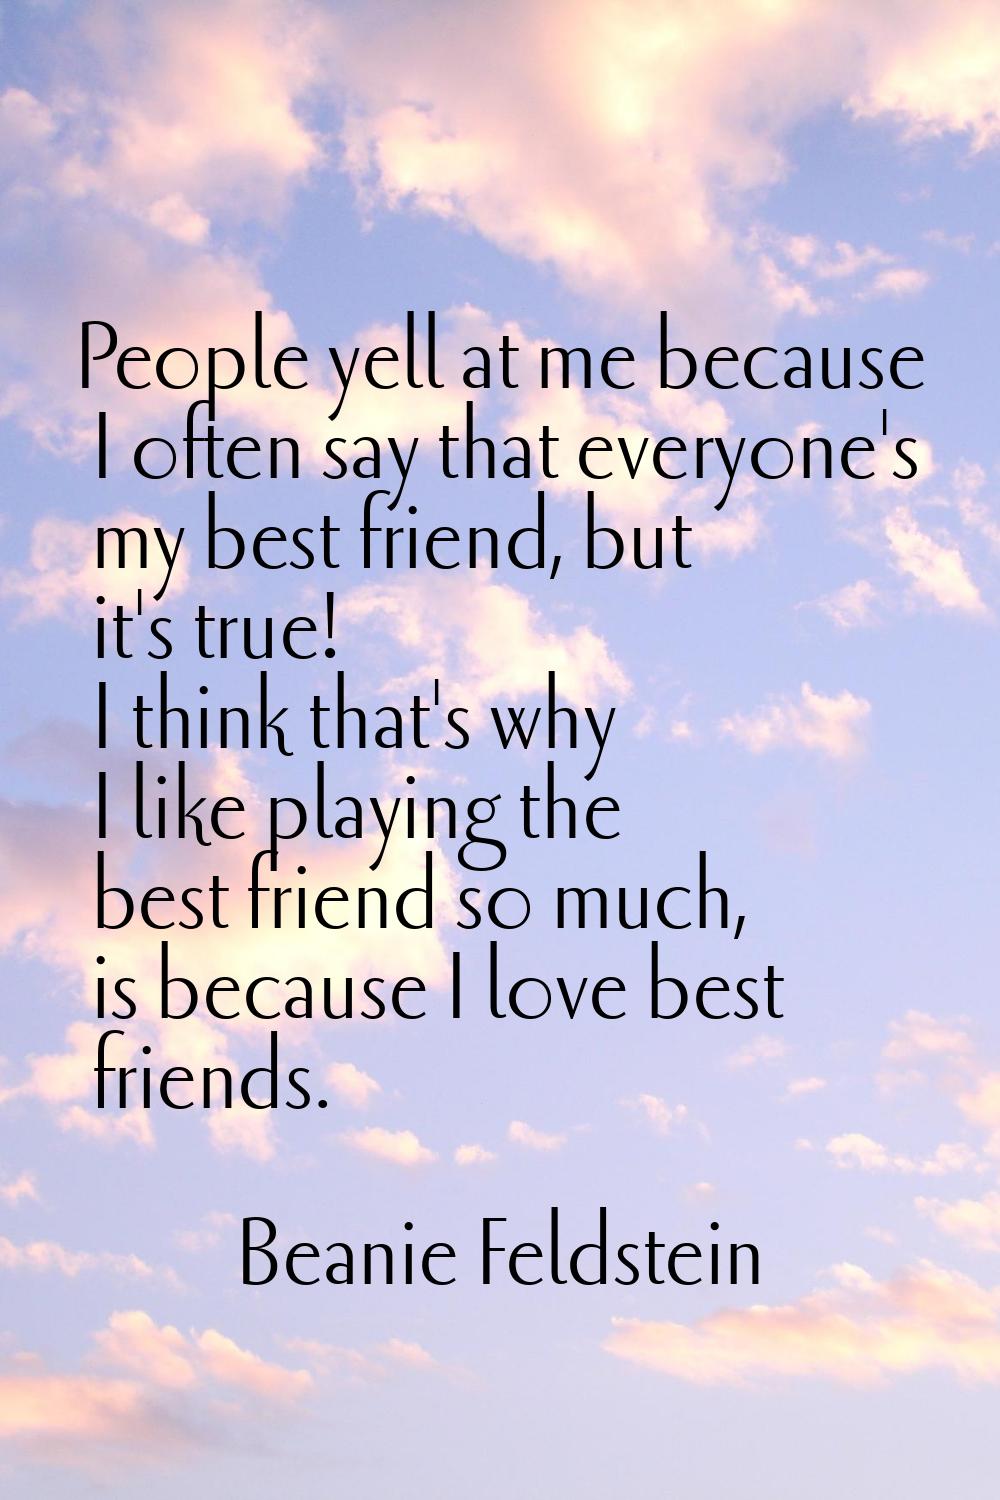 People yell at me because I often say that everyone's my best friend, but it's true! I think that's